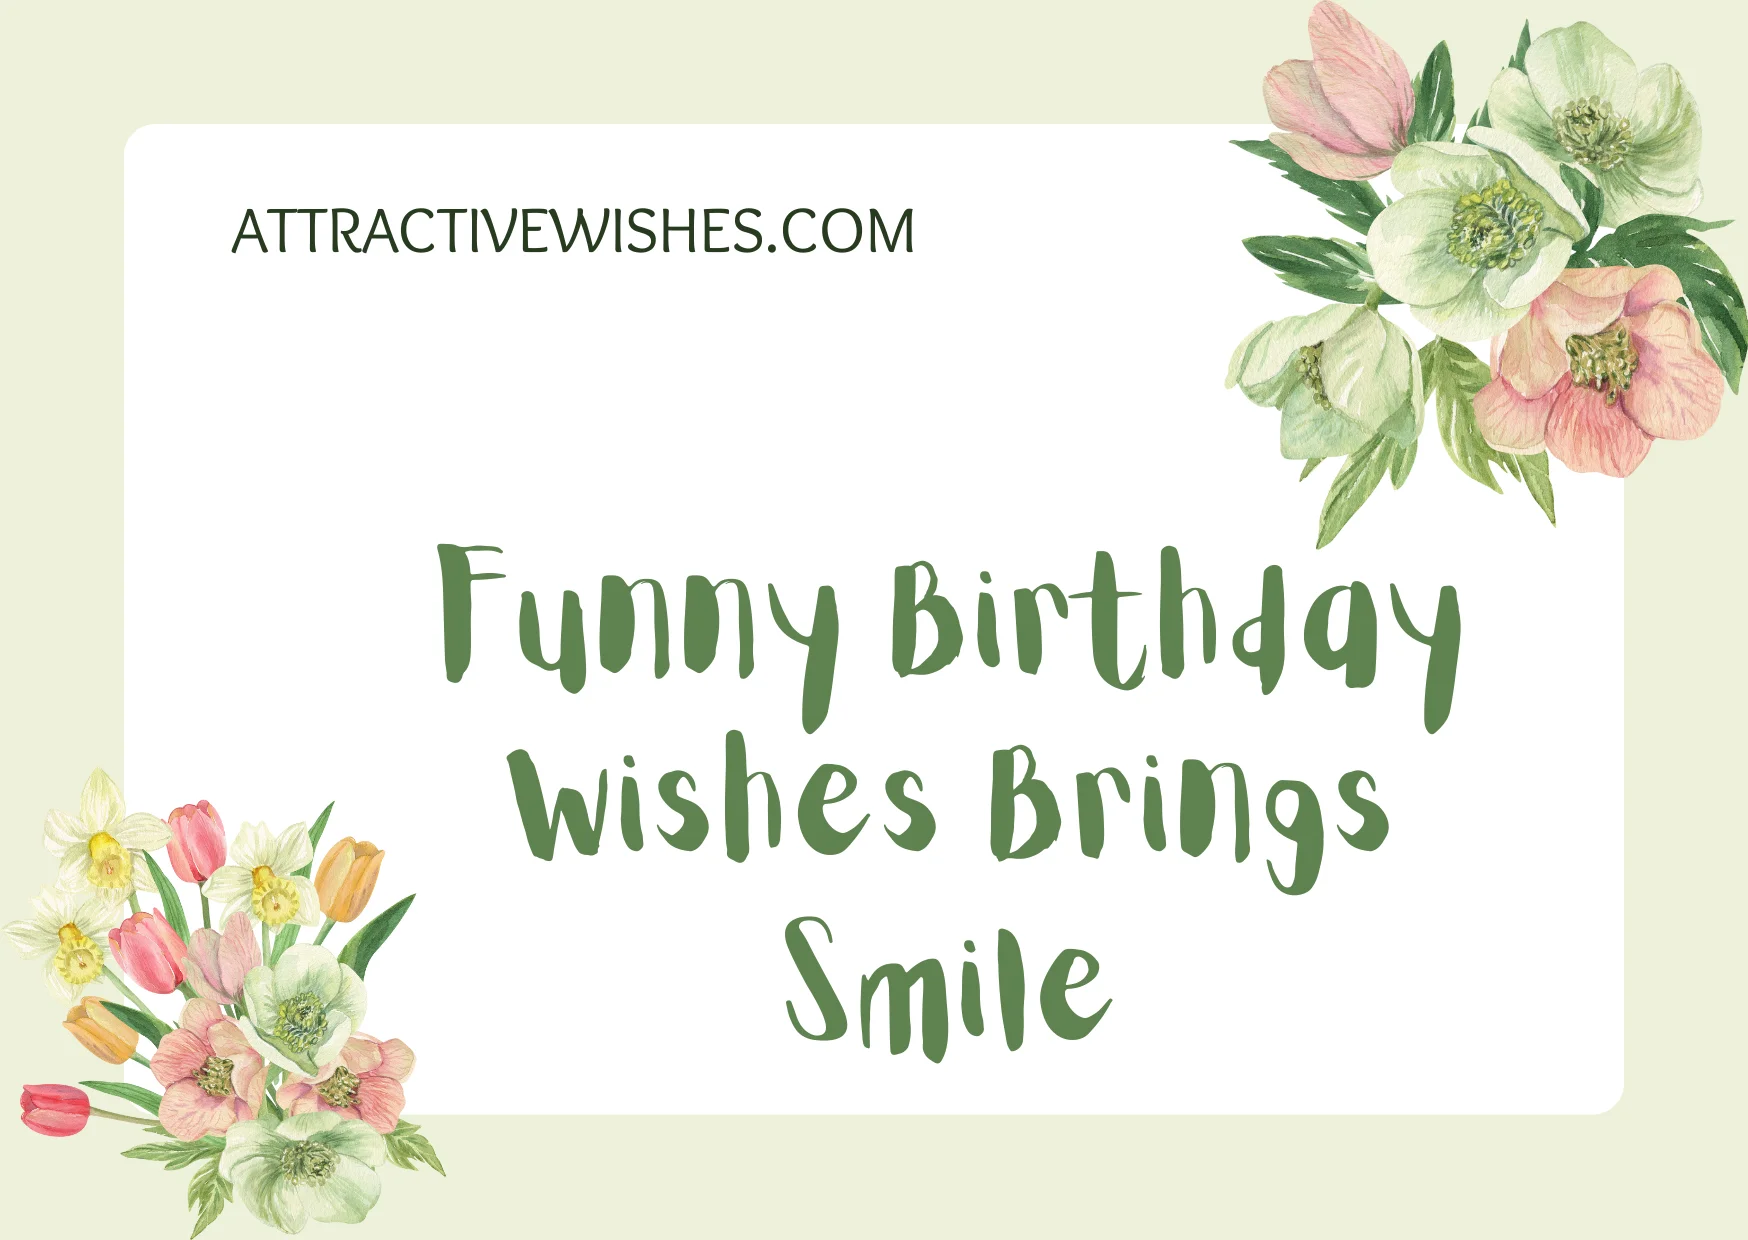 Funny Birthday Wishes Brings Smile